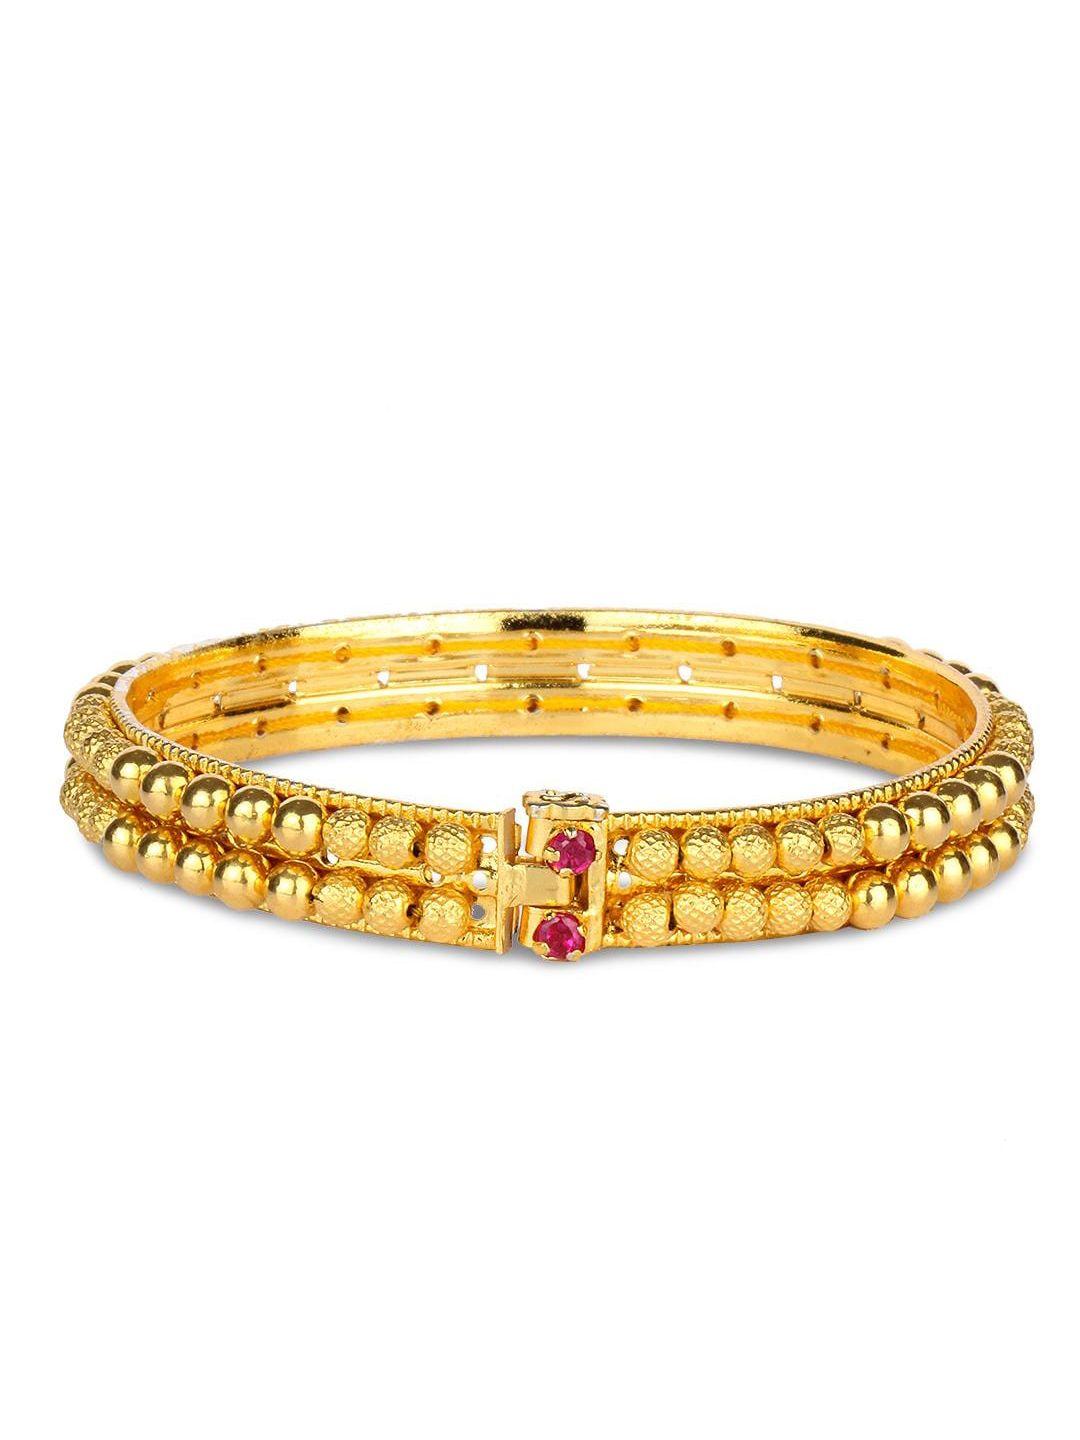 candere a kalyan jewellers company 22kt (916) gold traditional tushi bangle- 2.41gm